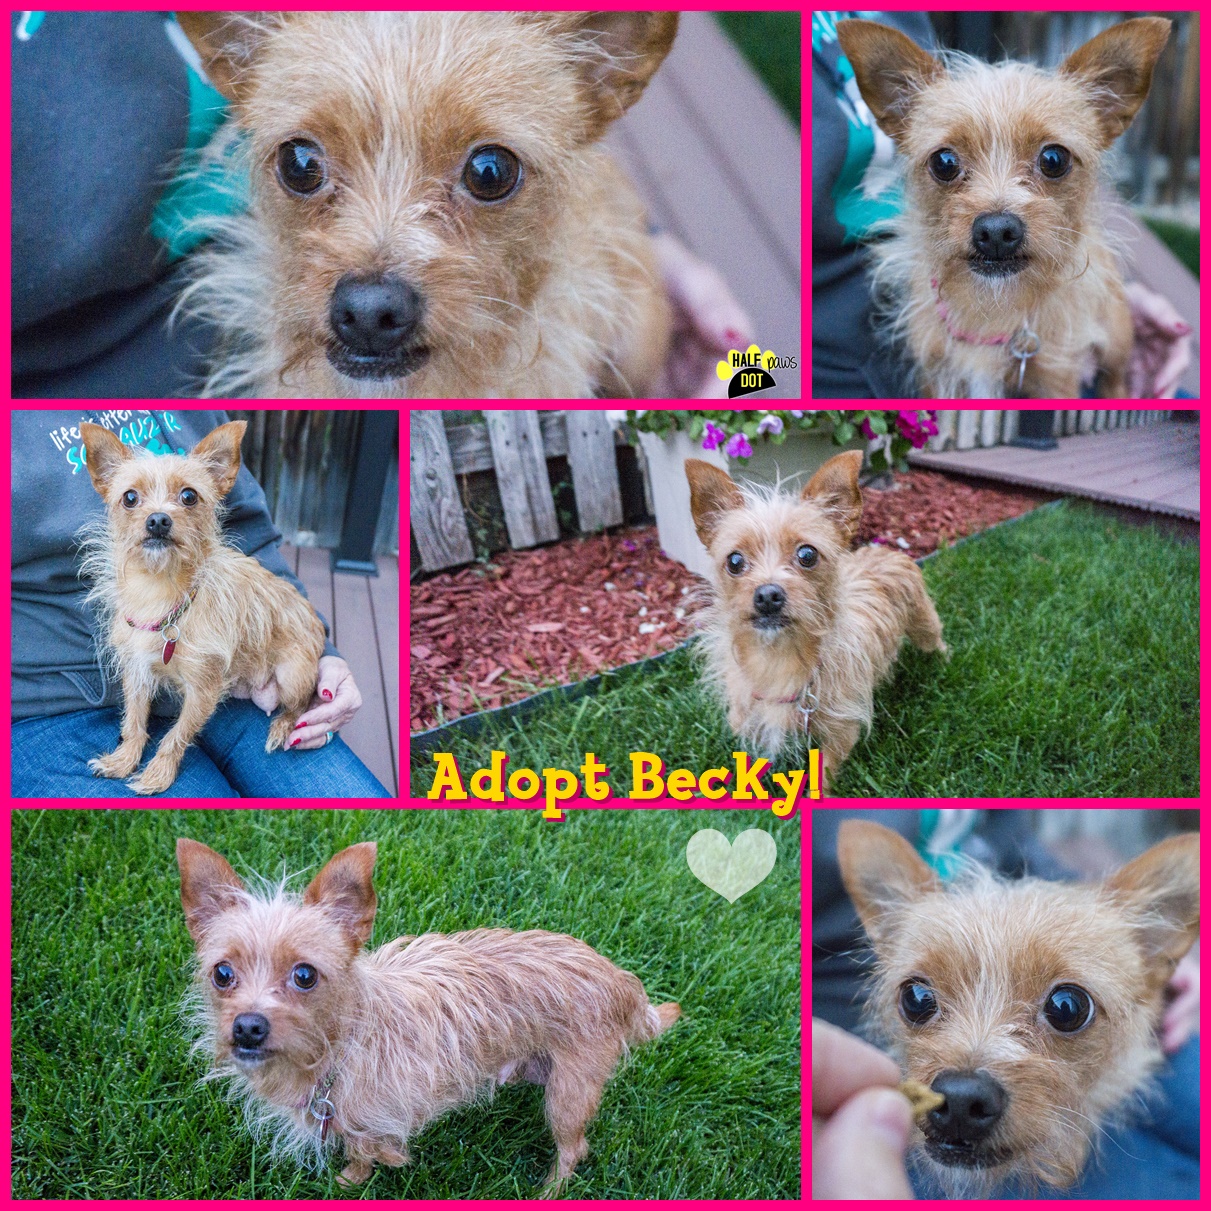 Becky (Terrier mix for adoption)